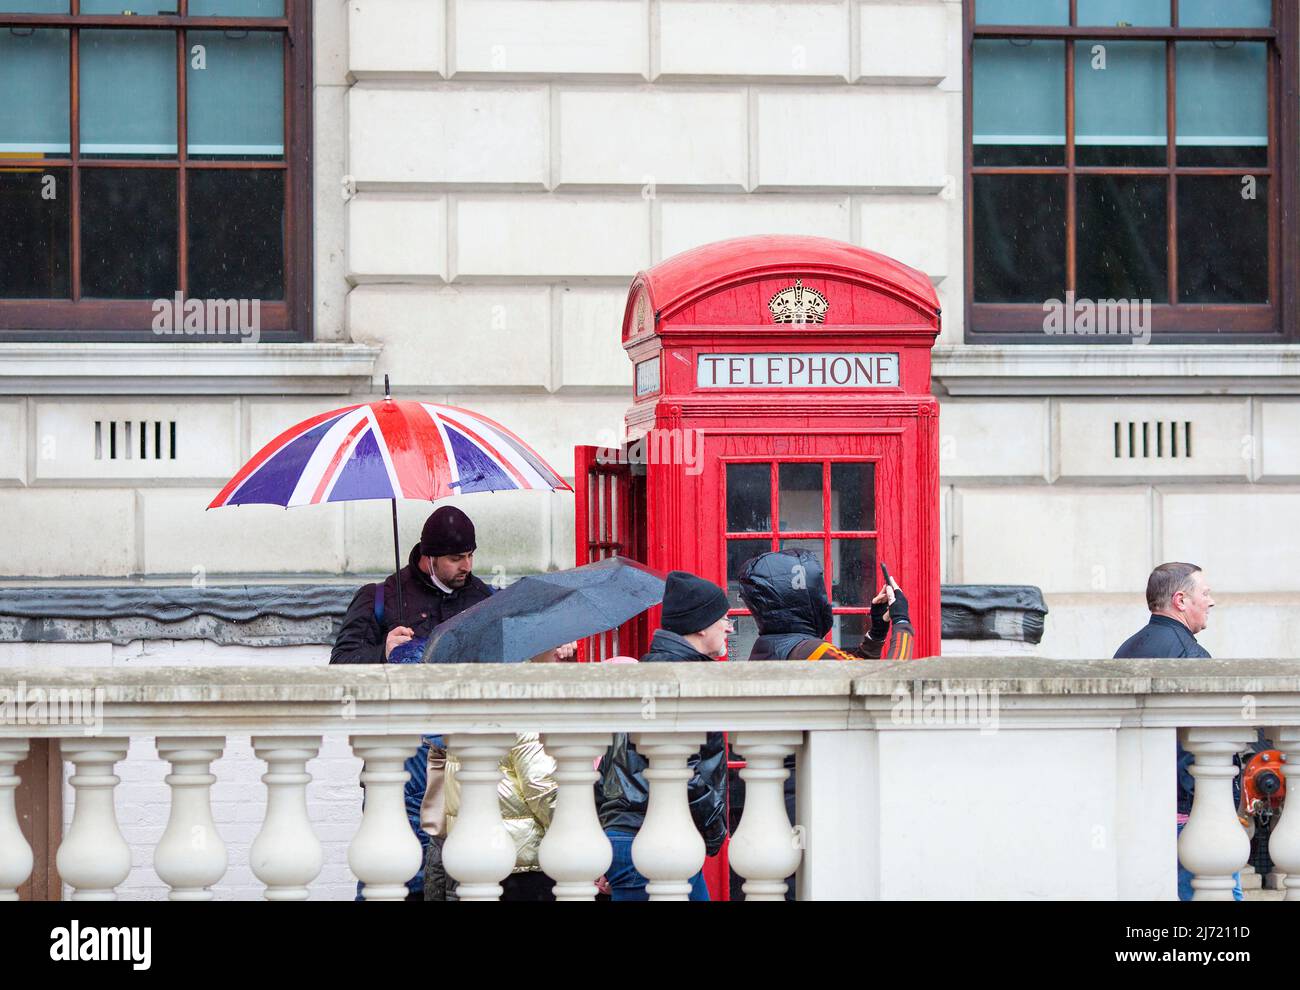 Pedestrians walk past a person holding a Union flag design umbrella next to a traditional red telephone box in Westminster, central London. Stock Photo